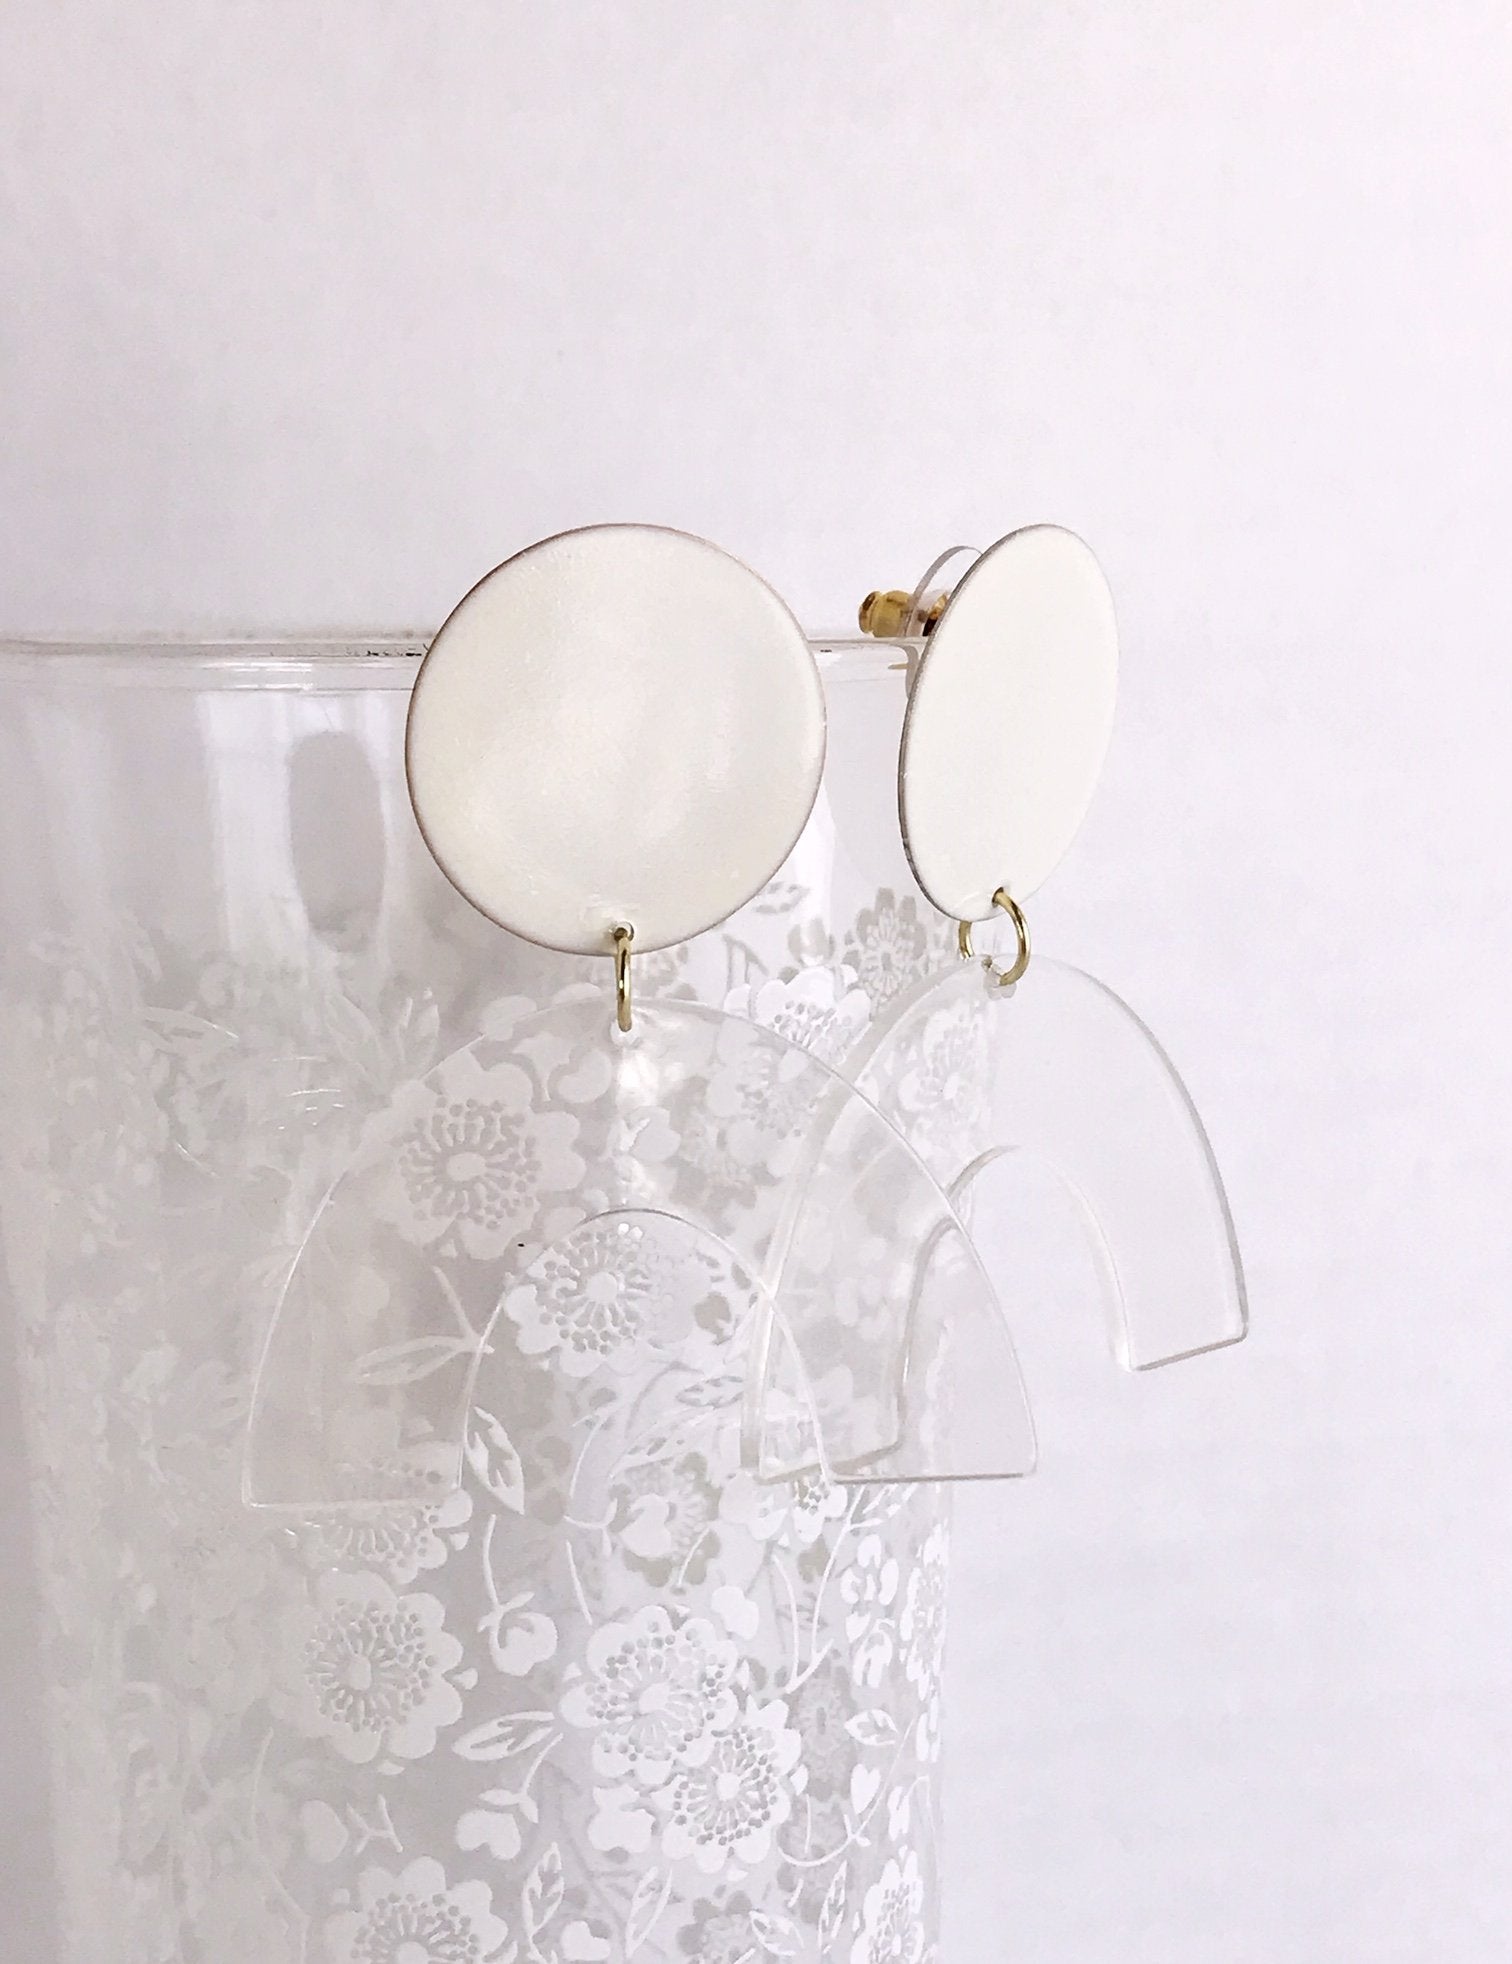 Ivory and Clear Tortoise Shell Arch Earrings - Handcrafted Statement Jewelry - Jewelry & Watches - Bijou Her -  -  - 